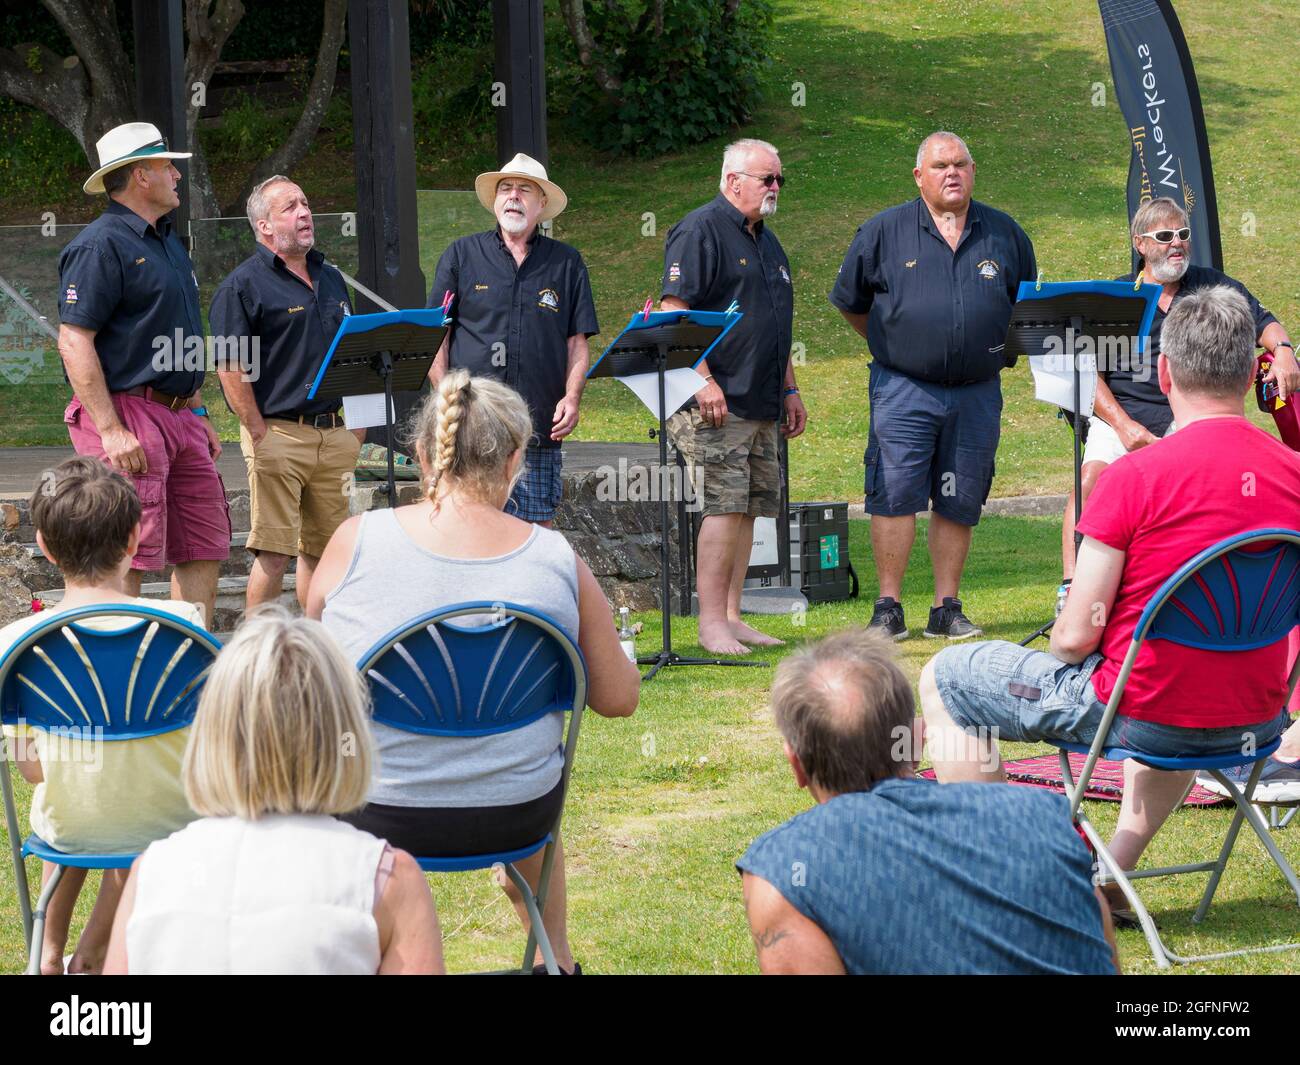 The Bencoolen wreckers, a local shanty singing group singing at the annual Bude-Stratton Heritage Festival, Bude, Cornwall, UK 25/07/2021 Stock Photo